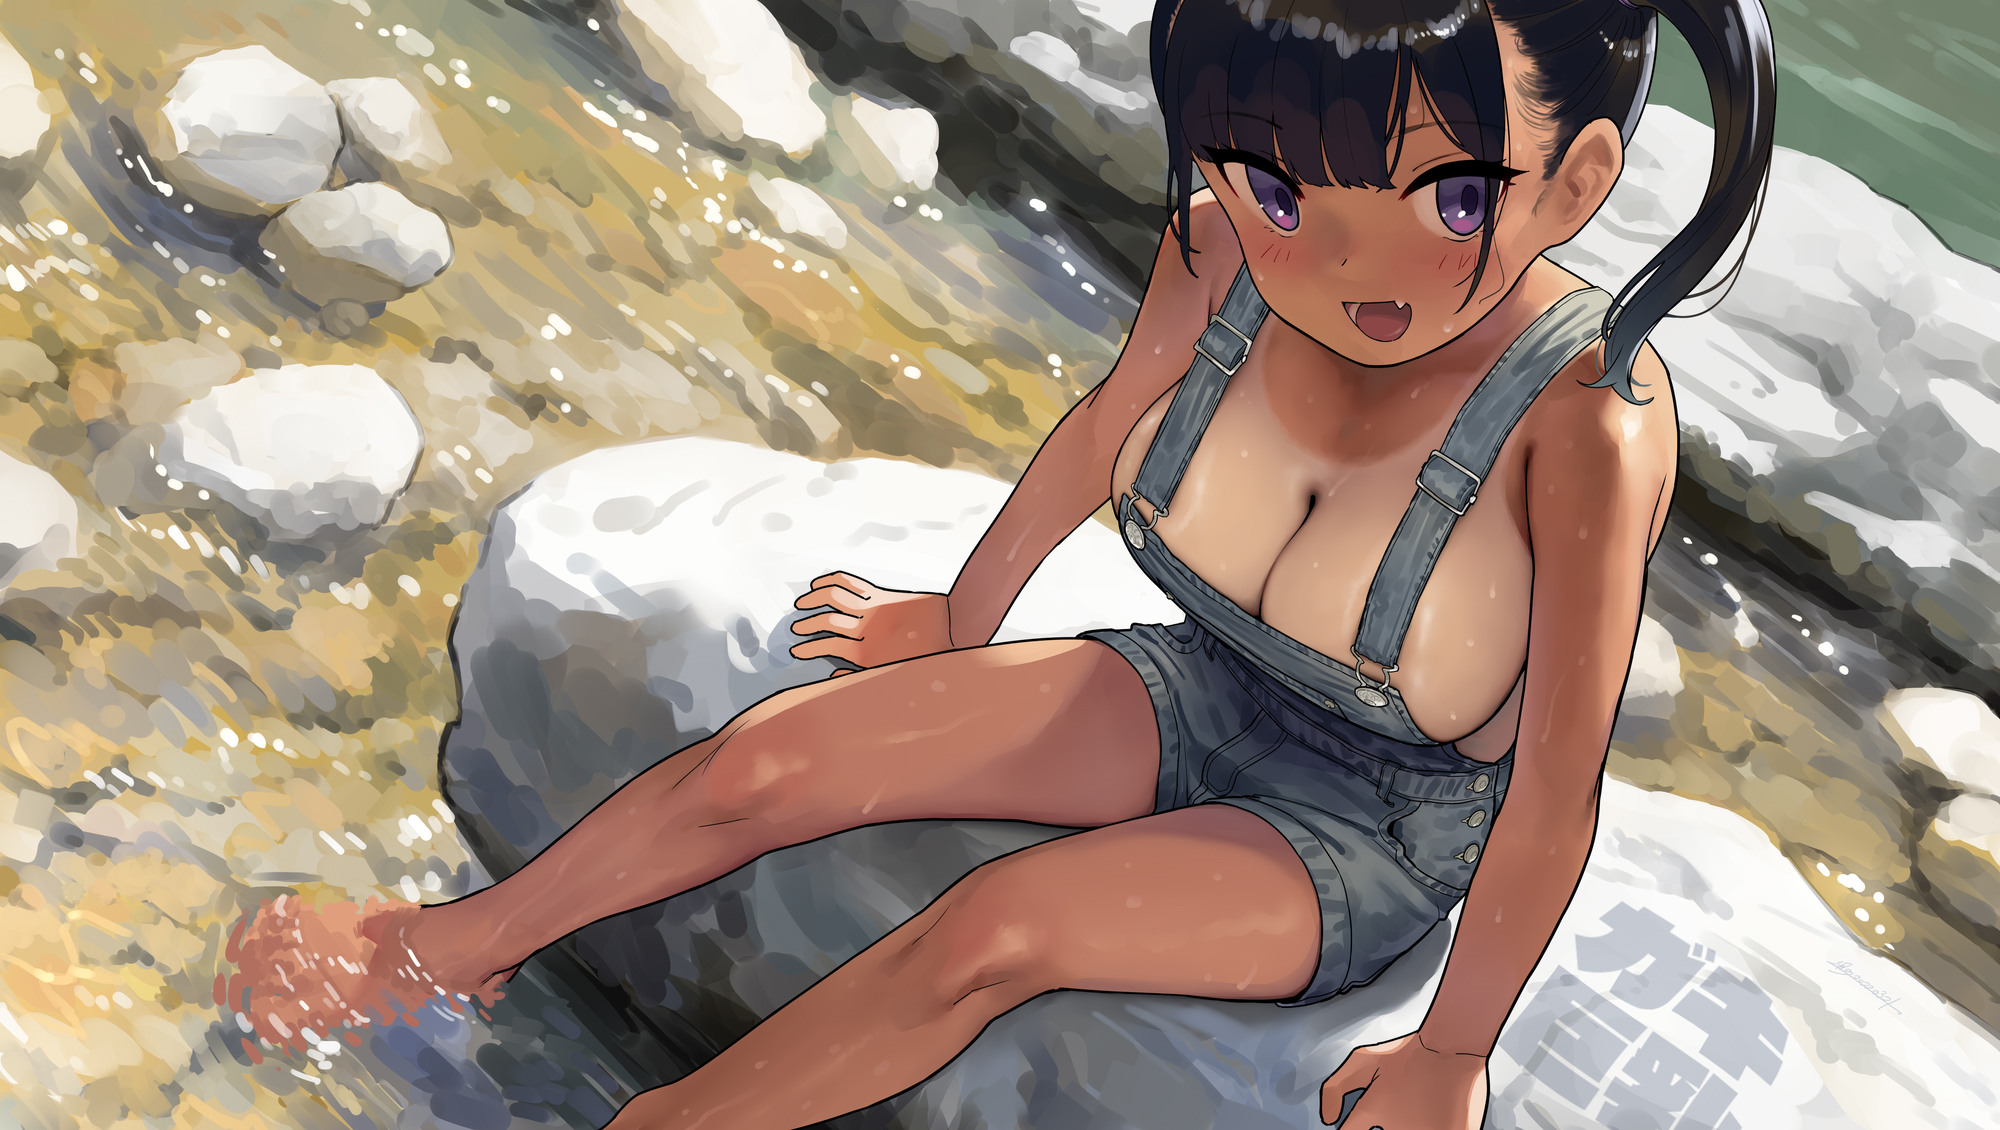 Anime 2000x1130 anime anime girls big boobs cleavage blushing tanned tan lines open mouth water rocks sitting black hair purple eyes no bra overalls jeans overalls looking at viewer artwork Kaedeko high angle